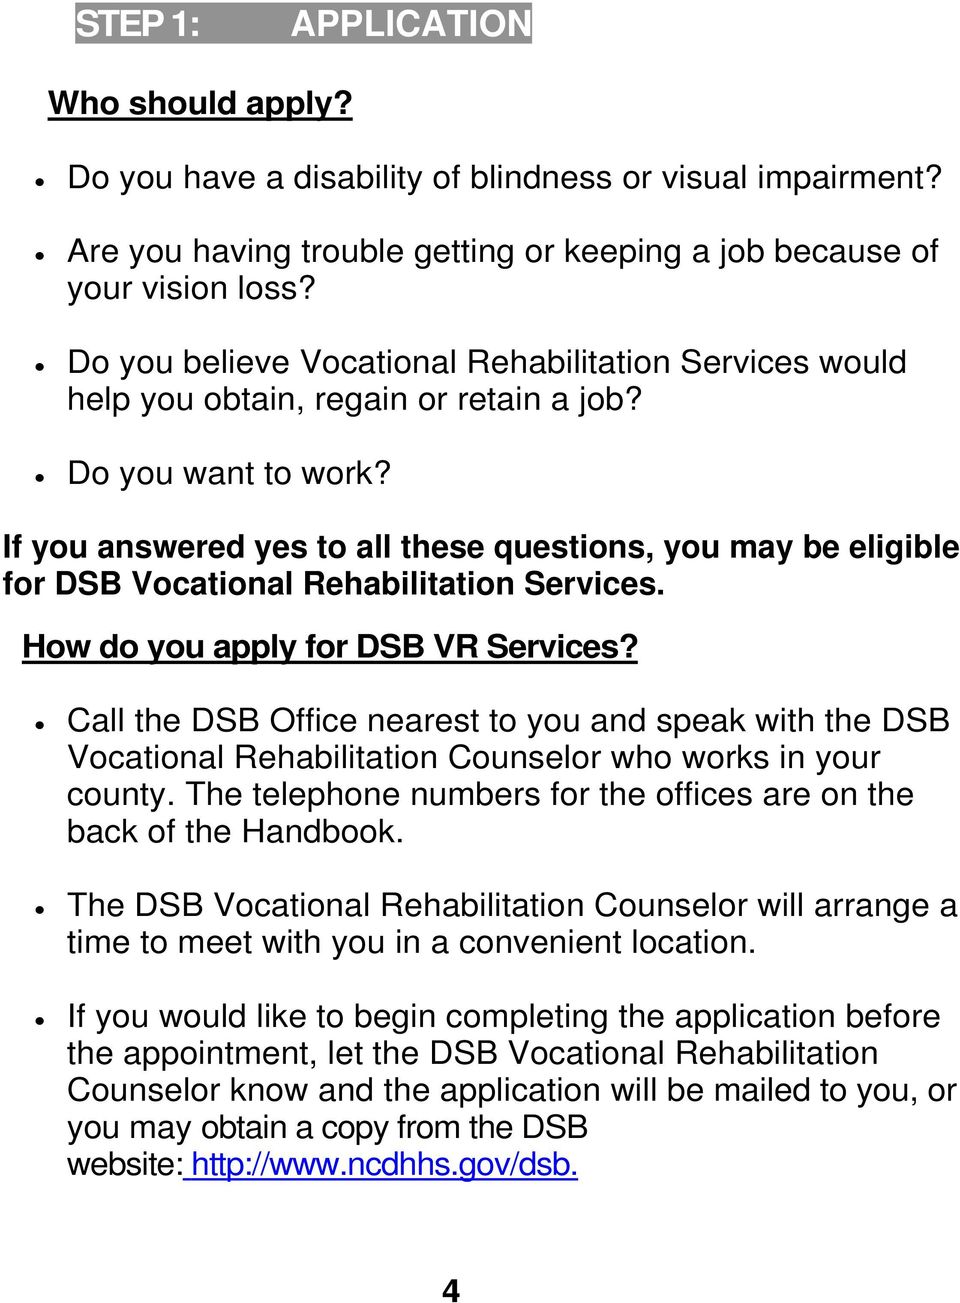 If you answered yes to all these questions, you may be eligible for DSB Vocational Rehabilitation Services. How do you apply for DSB VR Services?